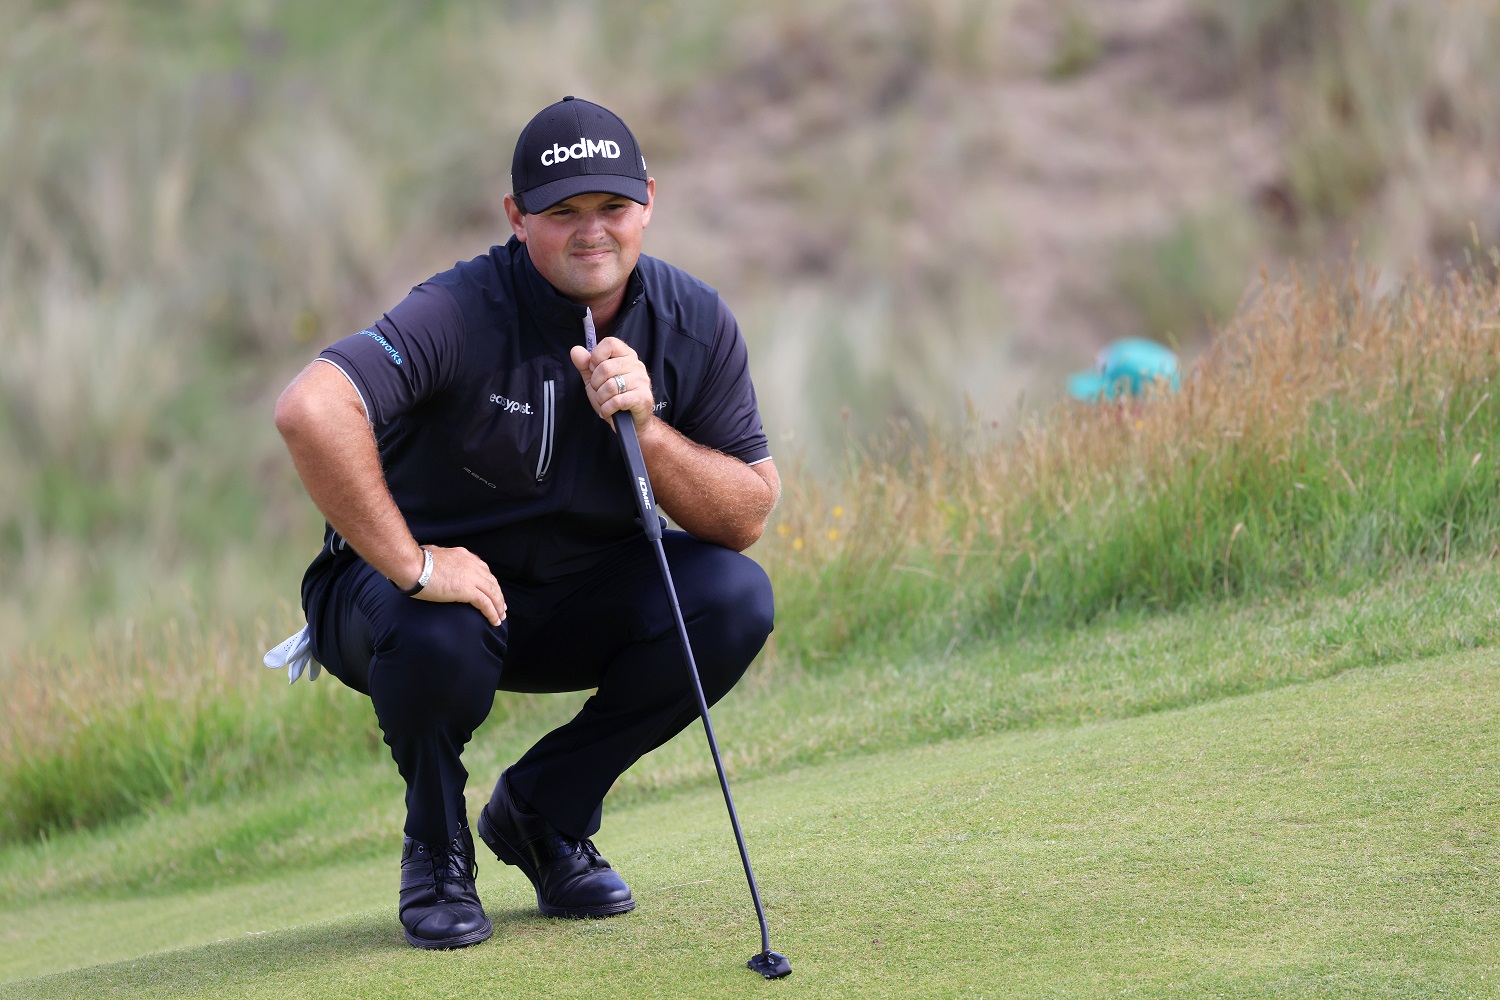 Patrick Reed of the United States lines up a putt on the third hole during the second round of the British Open at Royal St George’s Golf Club on July 16, 2021, in Sandwich, England. | Chris Trotman/Getty Images